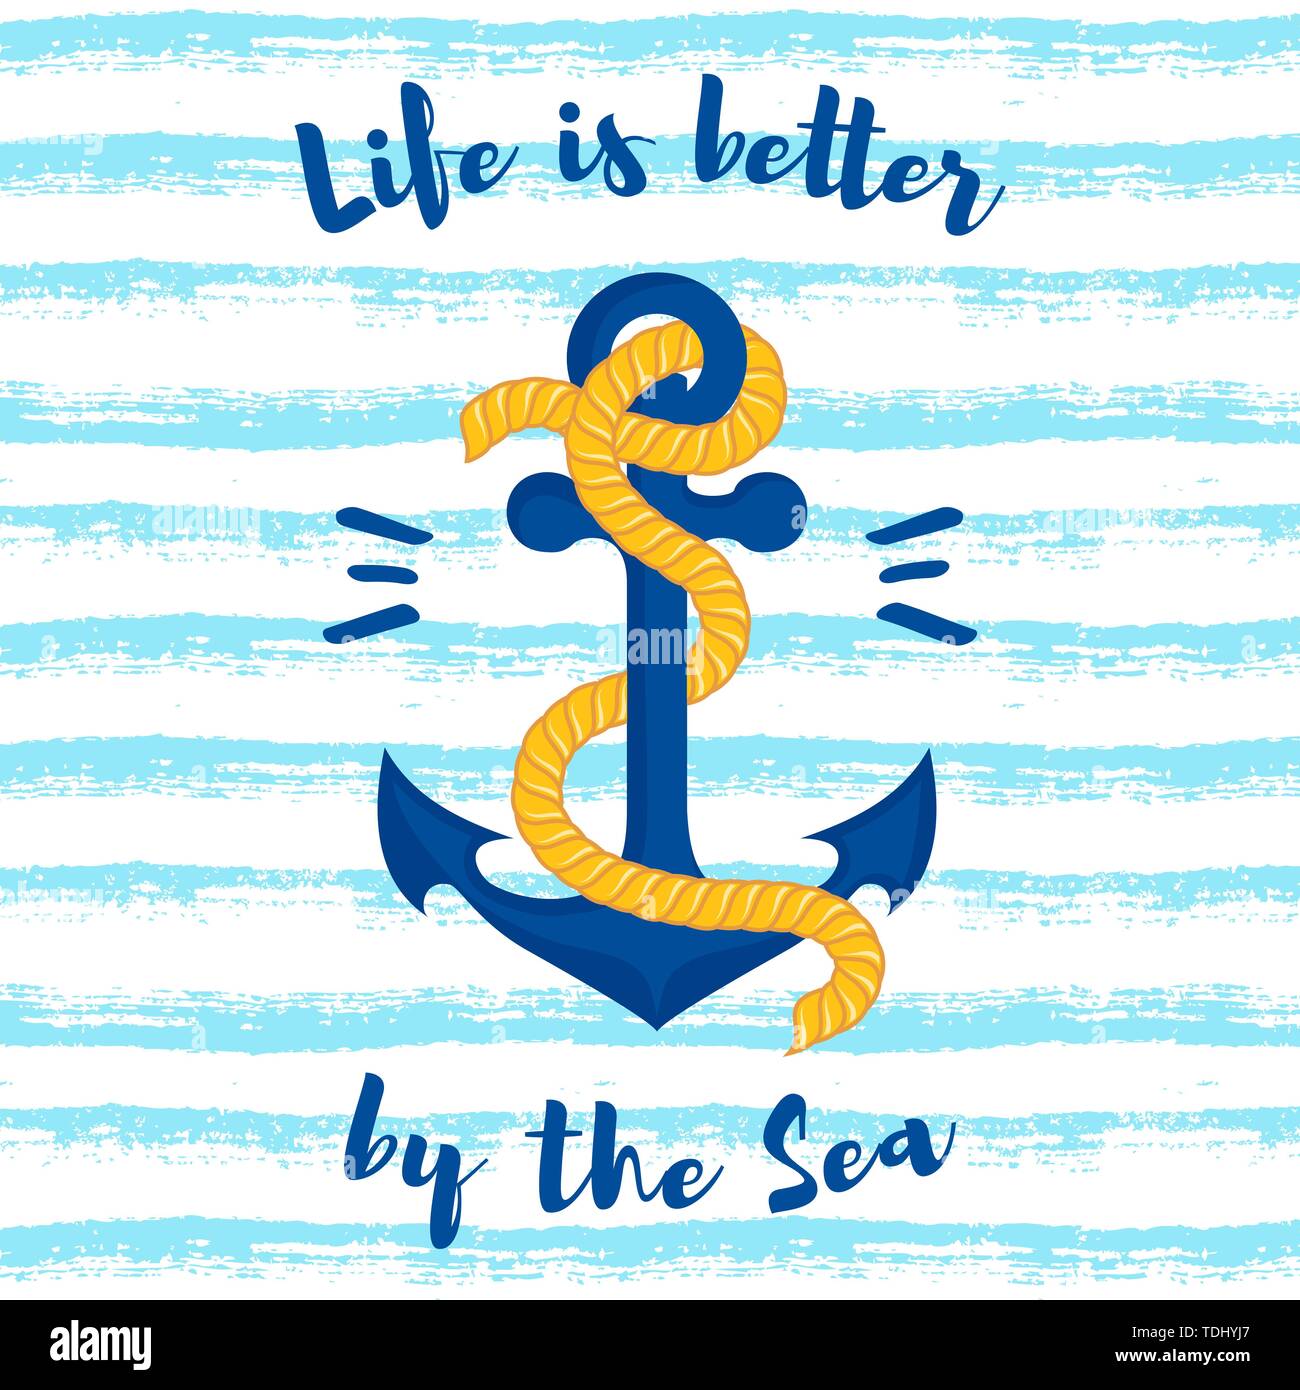 Vector illustration with anchor on a striped background. Life is better by the sea - slogan. Stock Vector